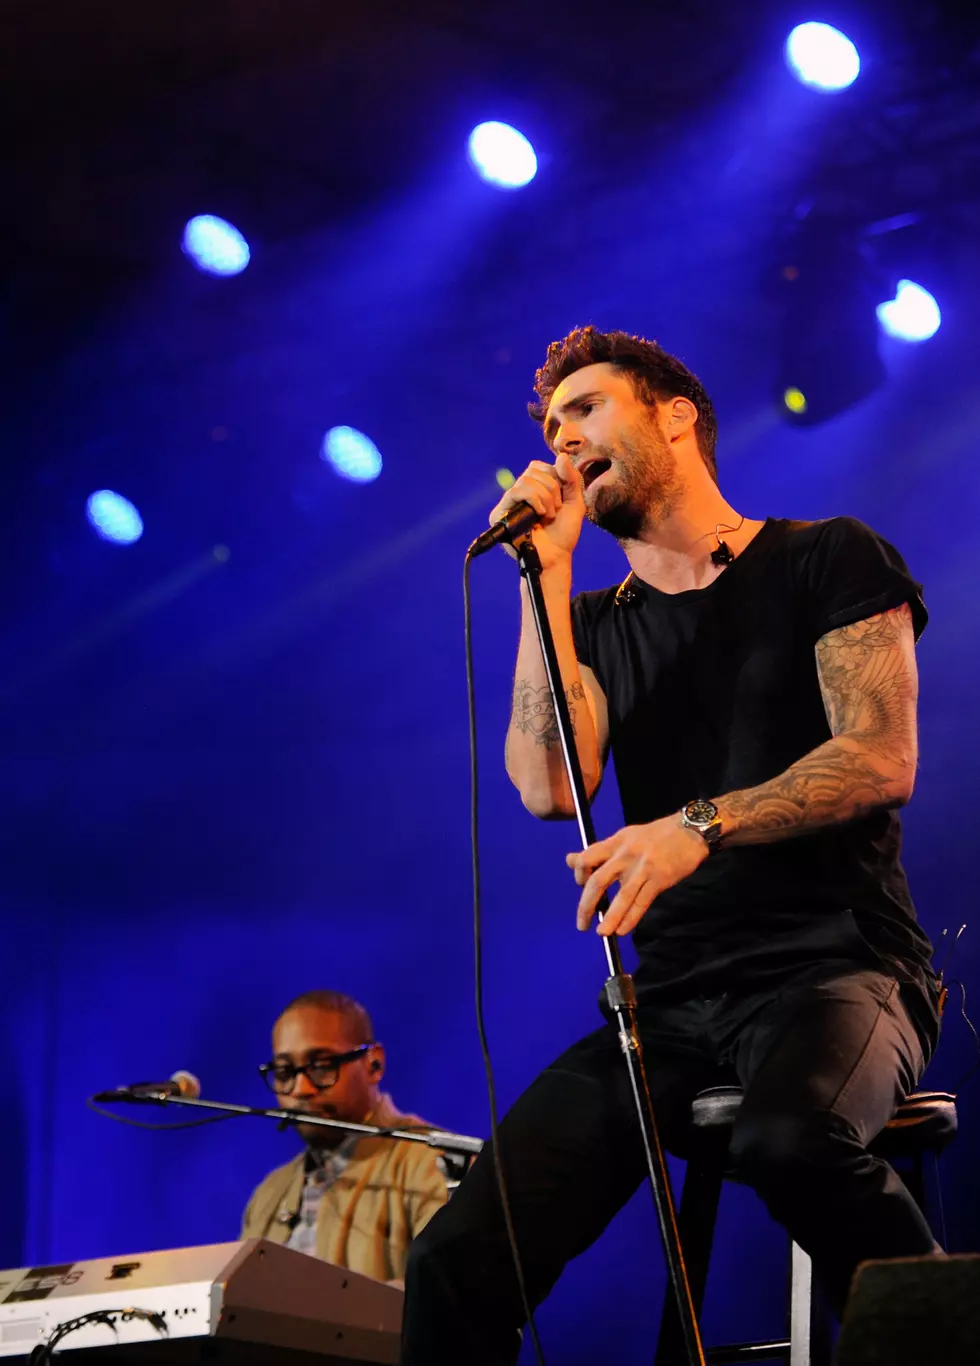 Adam Levine Accidentally Hit a Fan in the Face During a Show [VIDEO]